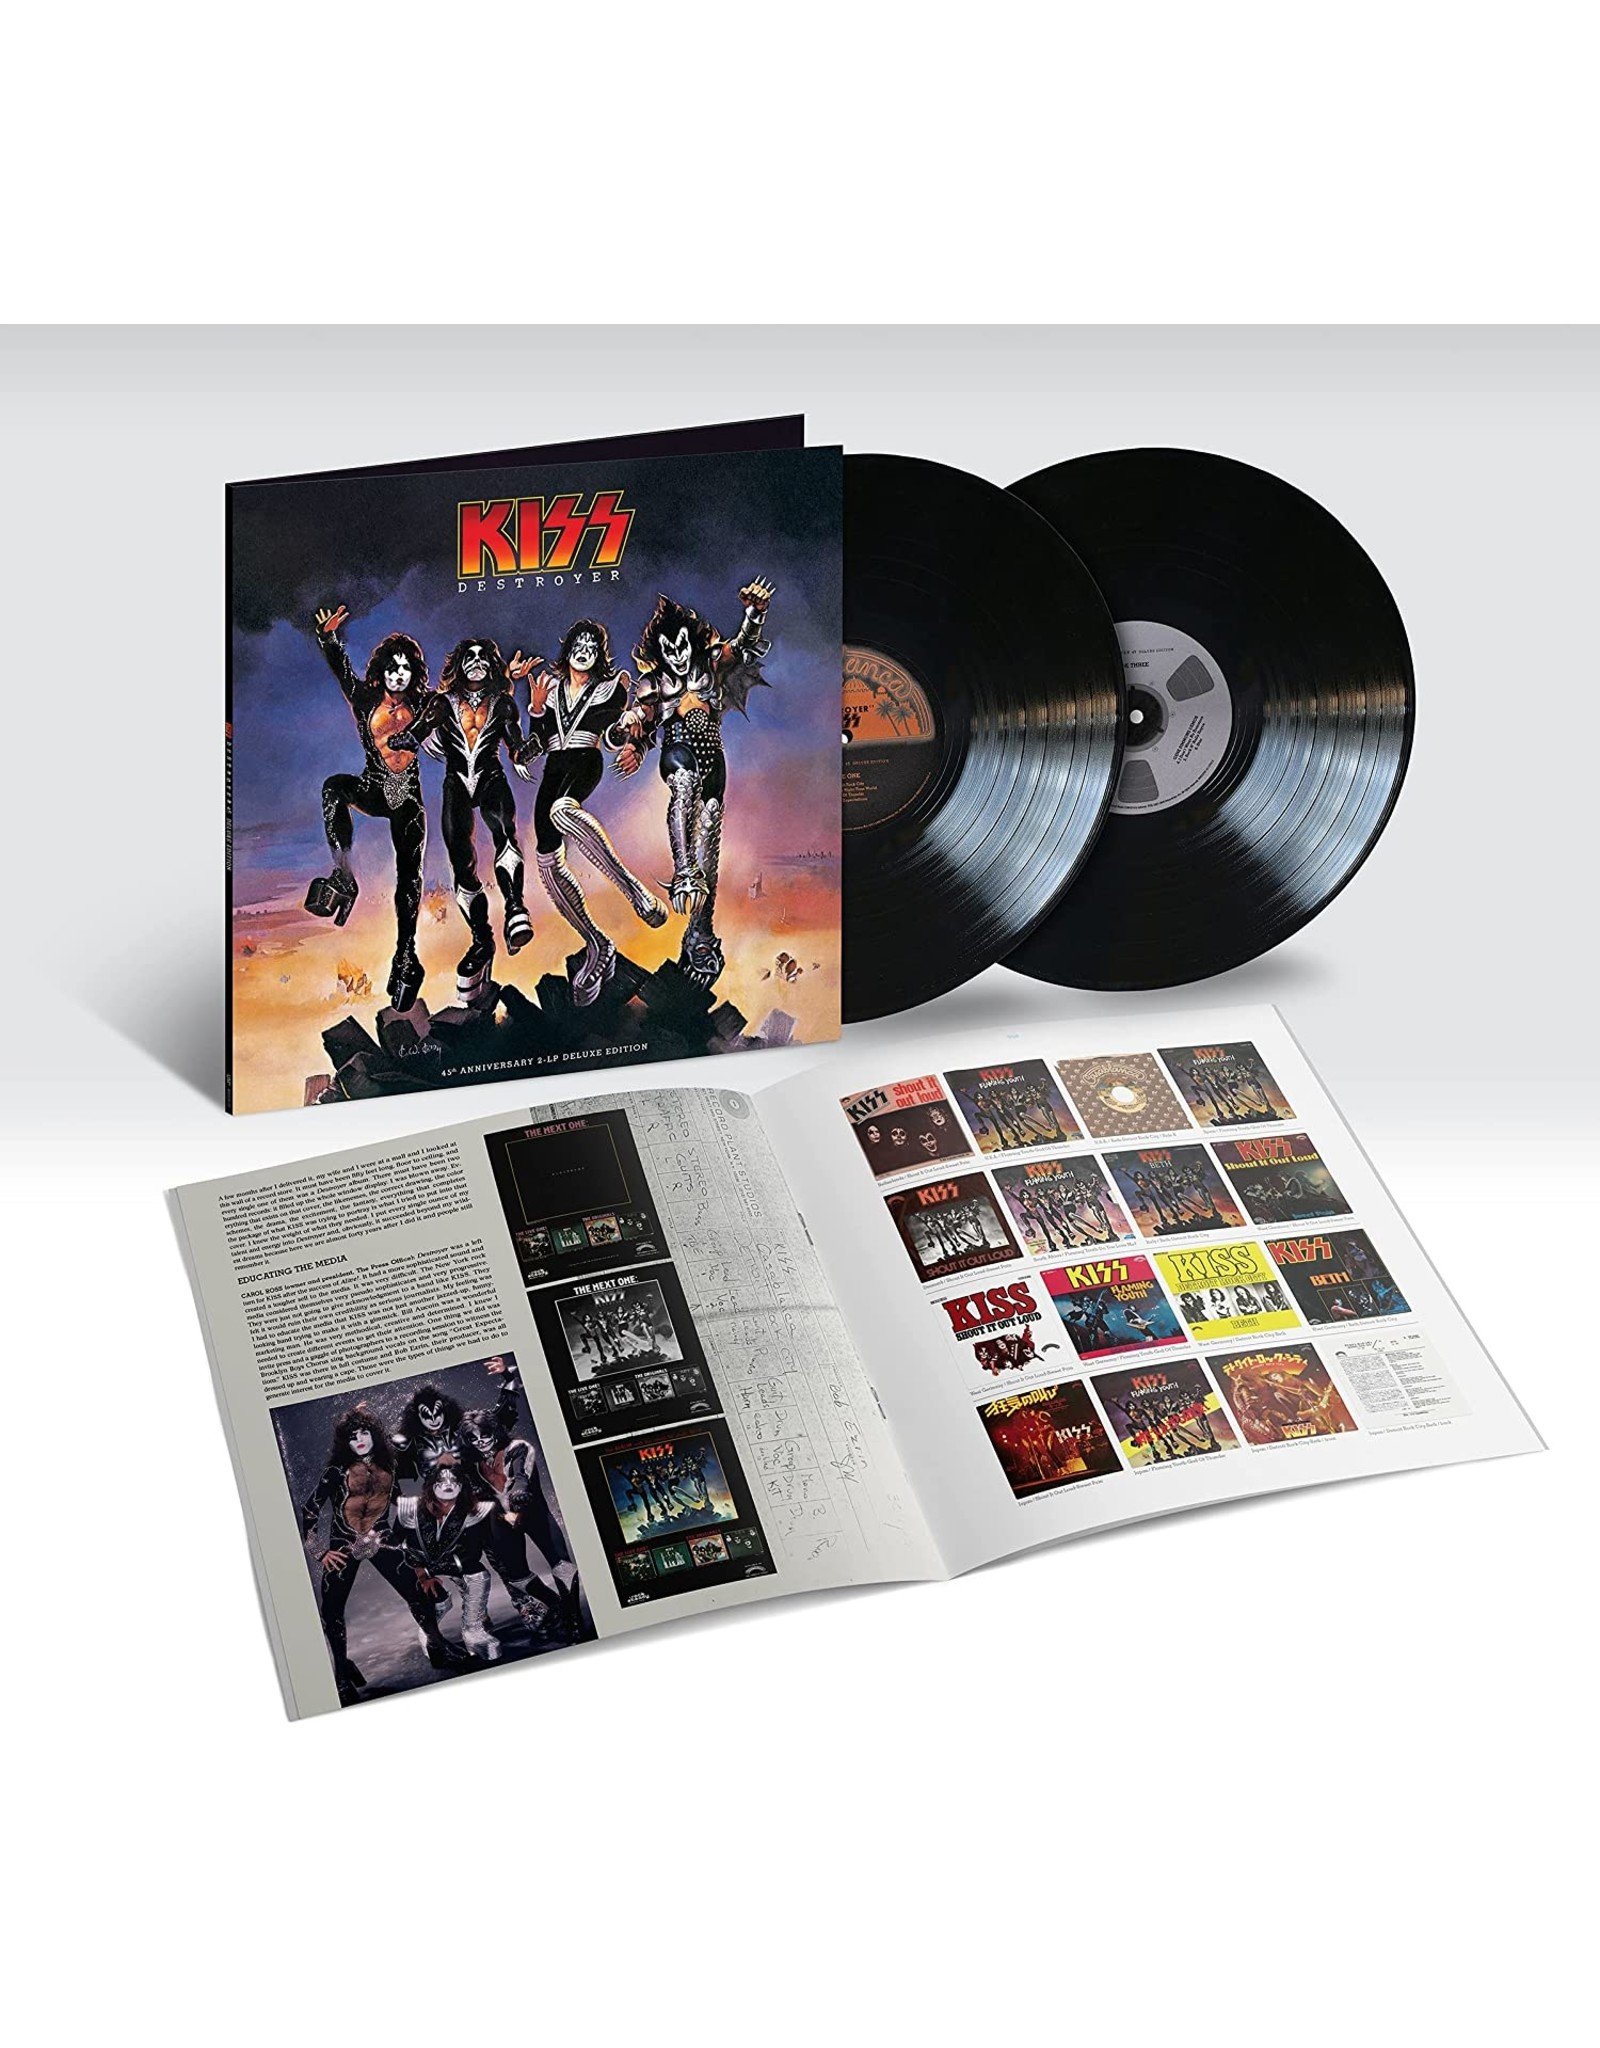 KISS - Destroyer (Deluxe Edition)